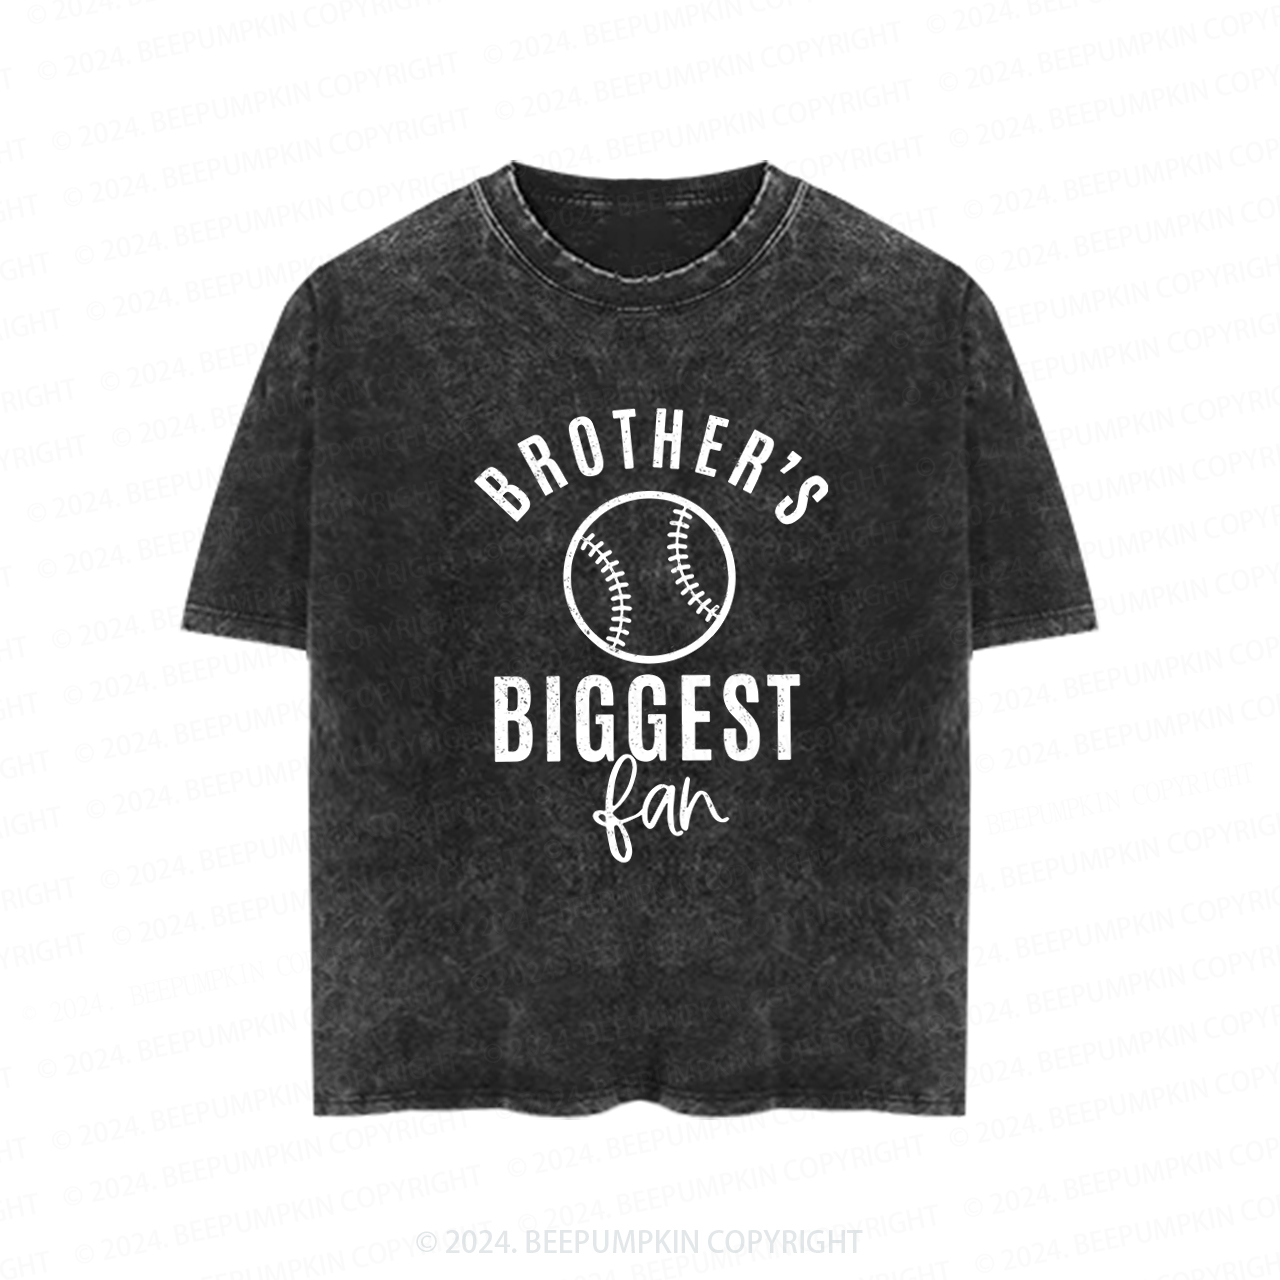 Brother's Biggest Fan Baseball Toddler&Kids Washed Tees  